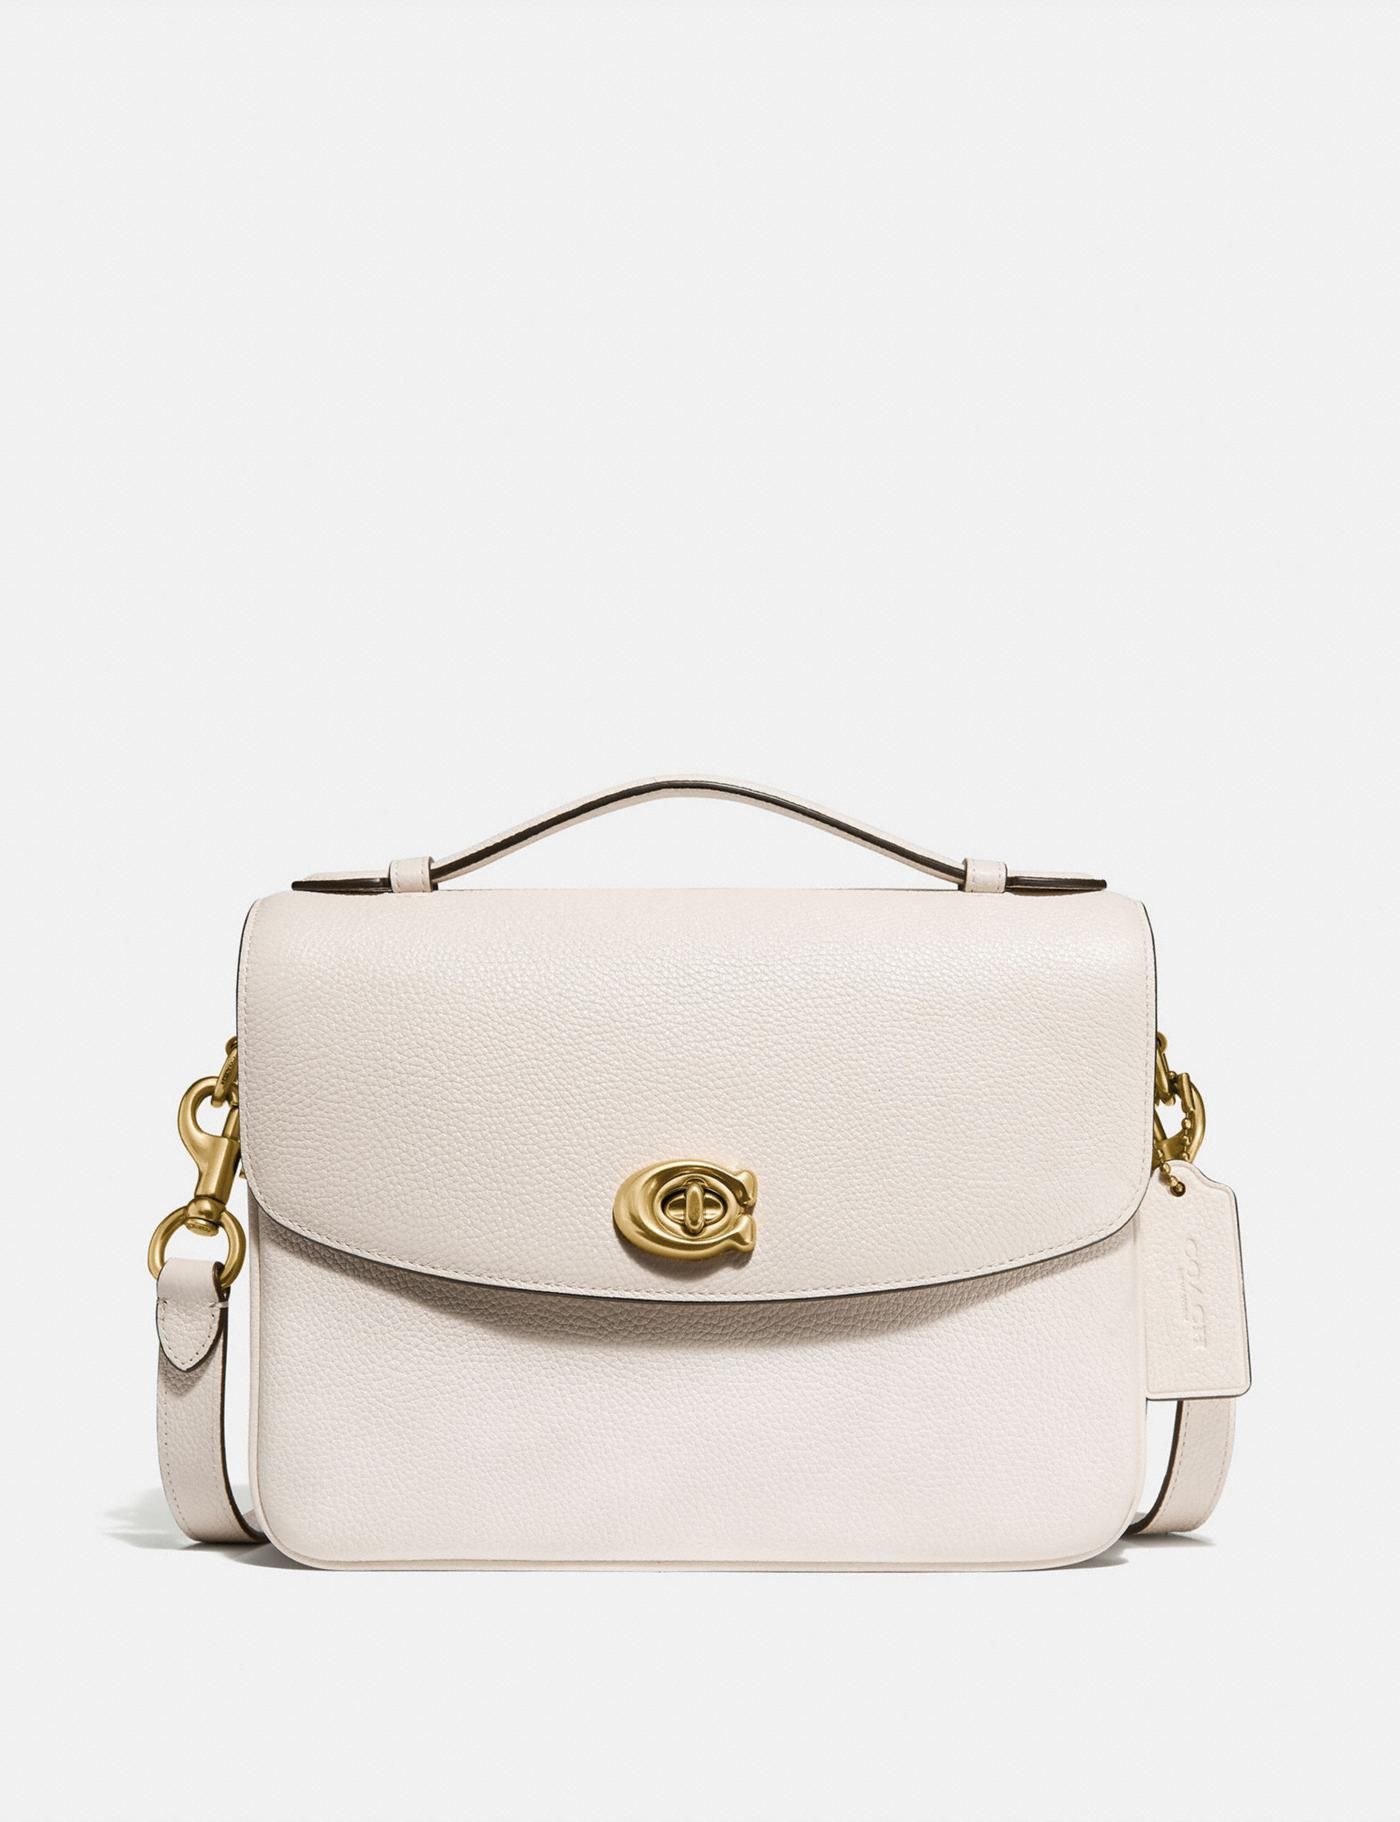 Give Some Love This Holiday With Coach's Heart Bag - PurseBlog